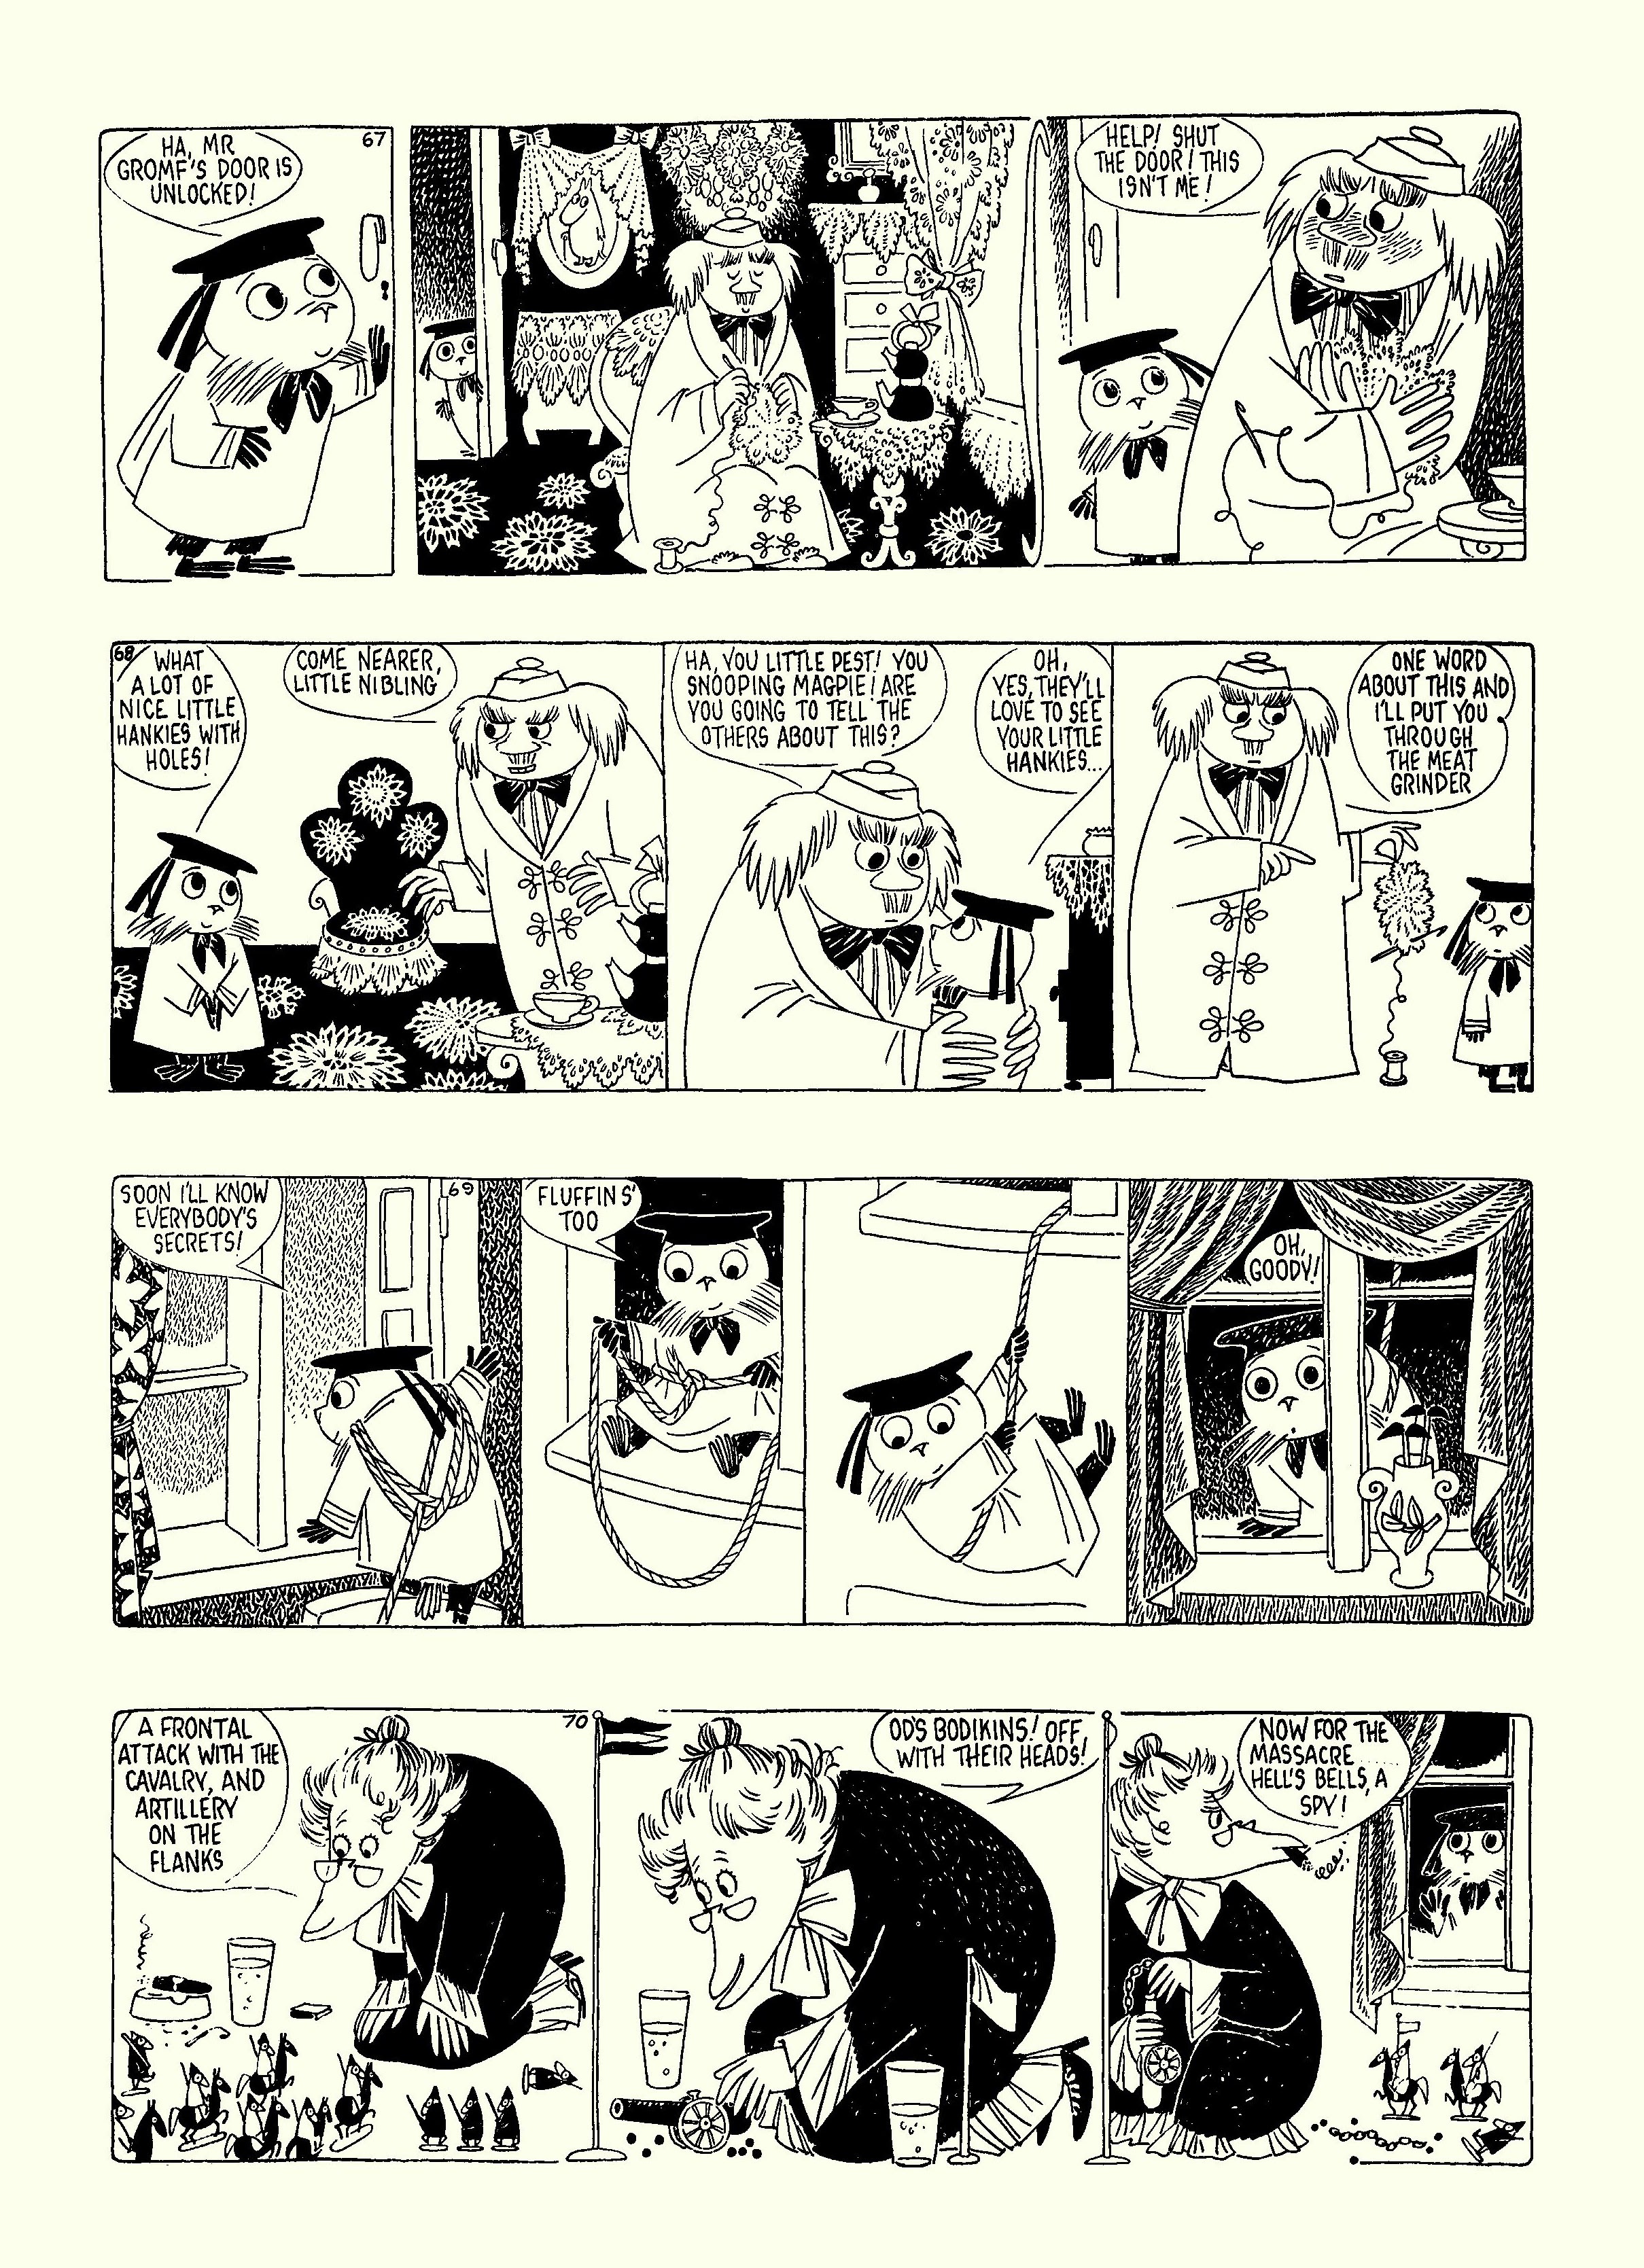 Read online Moomin: The Complete Tove Jansson Comic Strip comic -  Issue # TPB 5 - 23